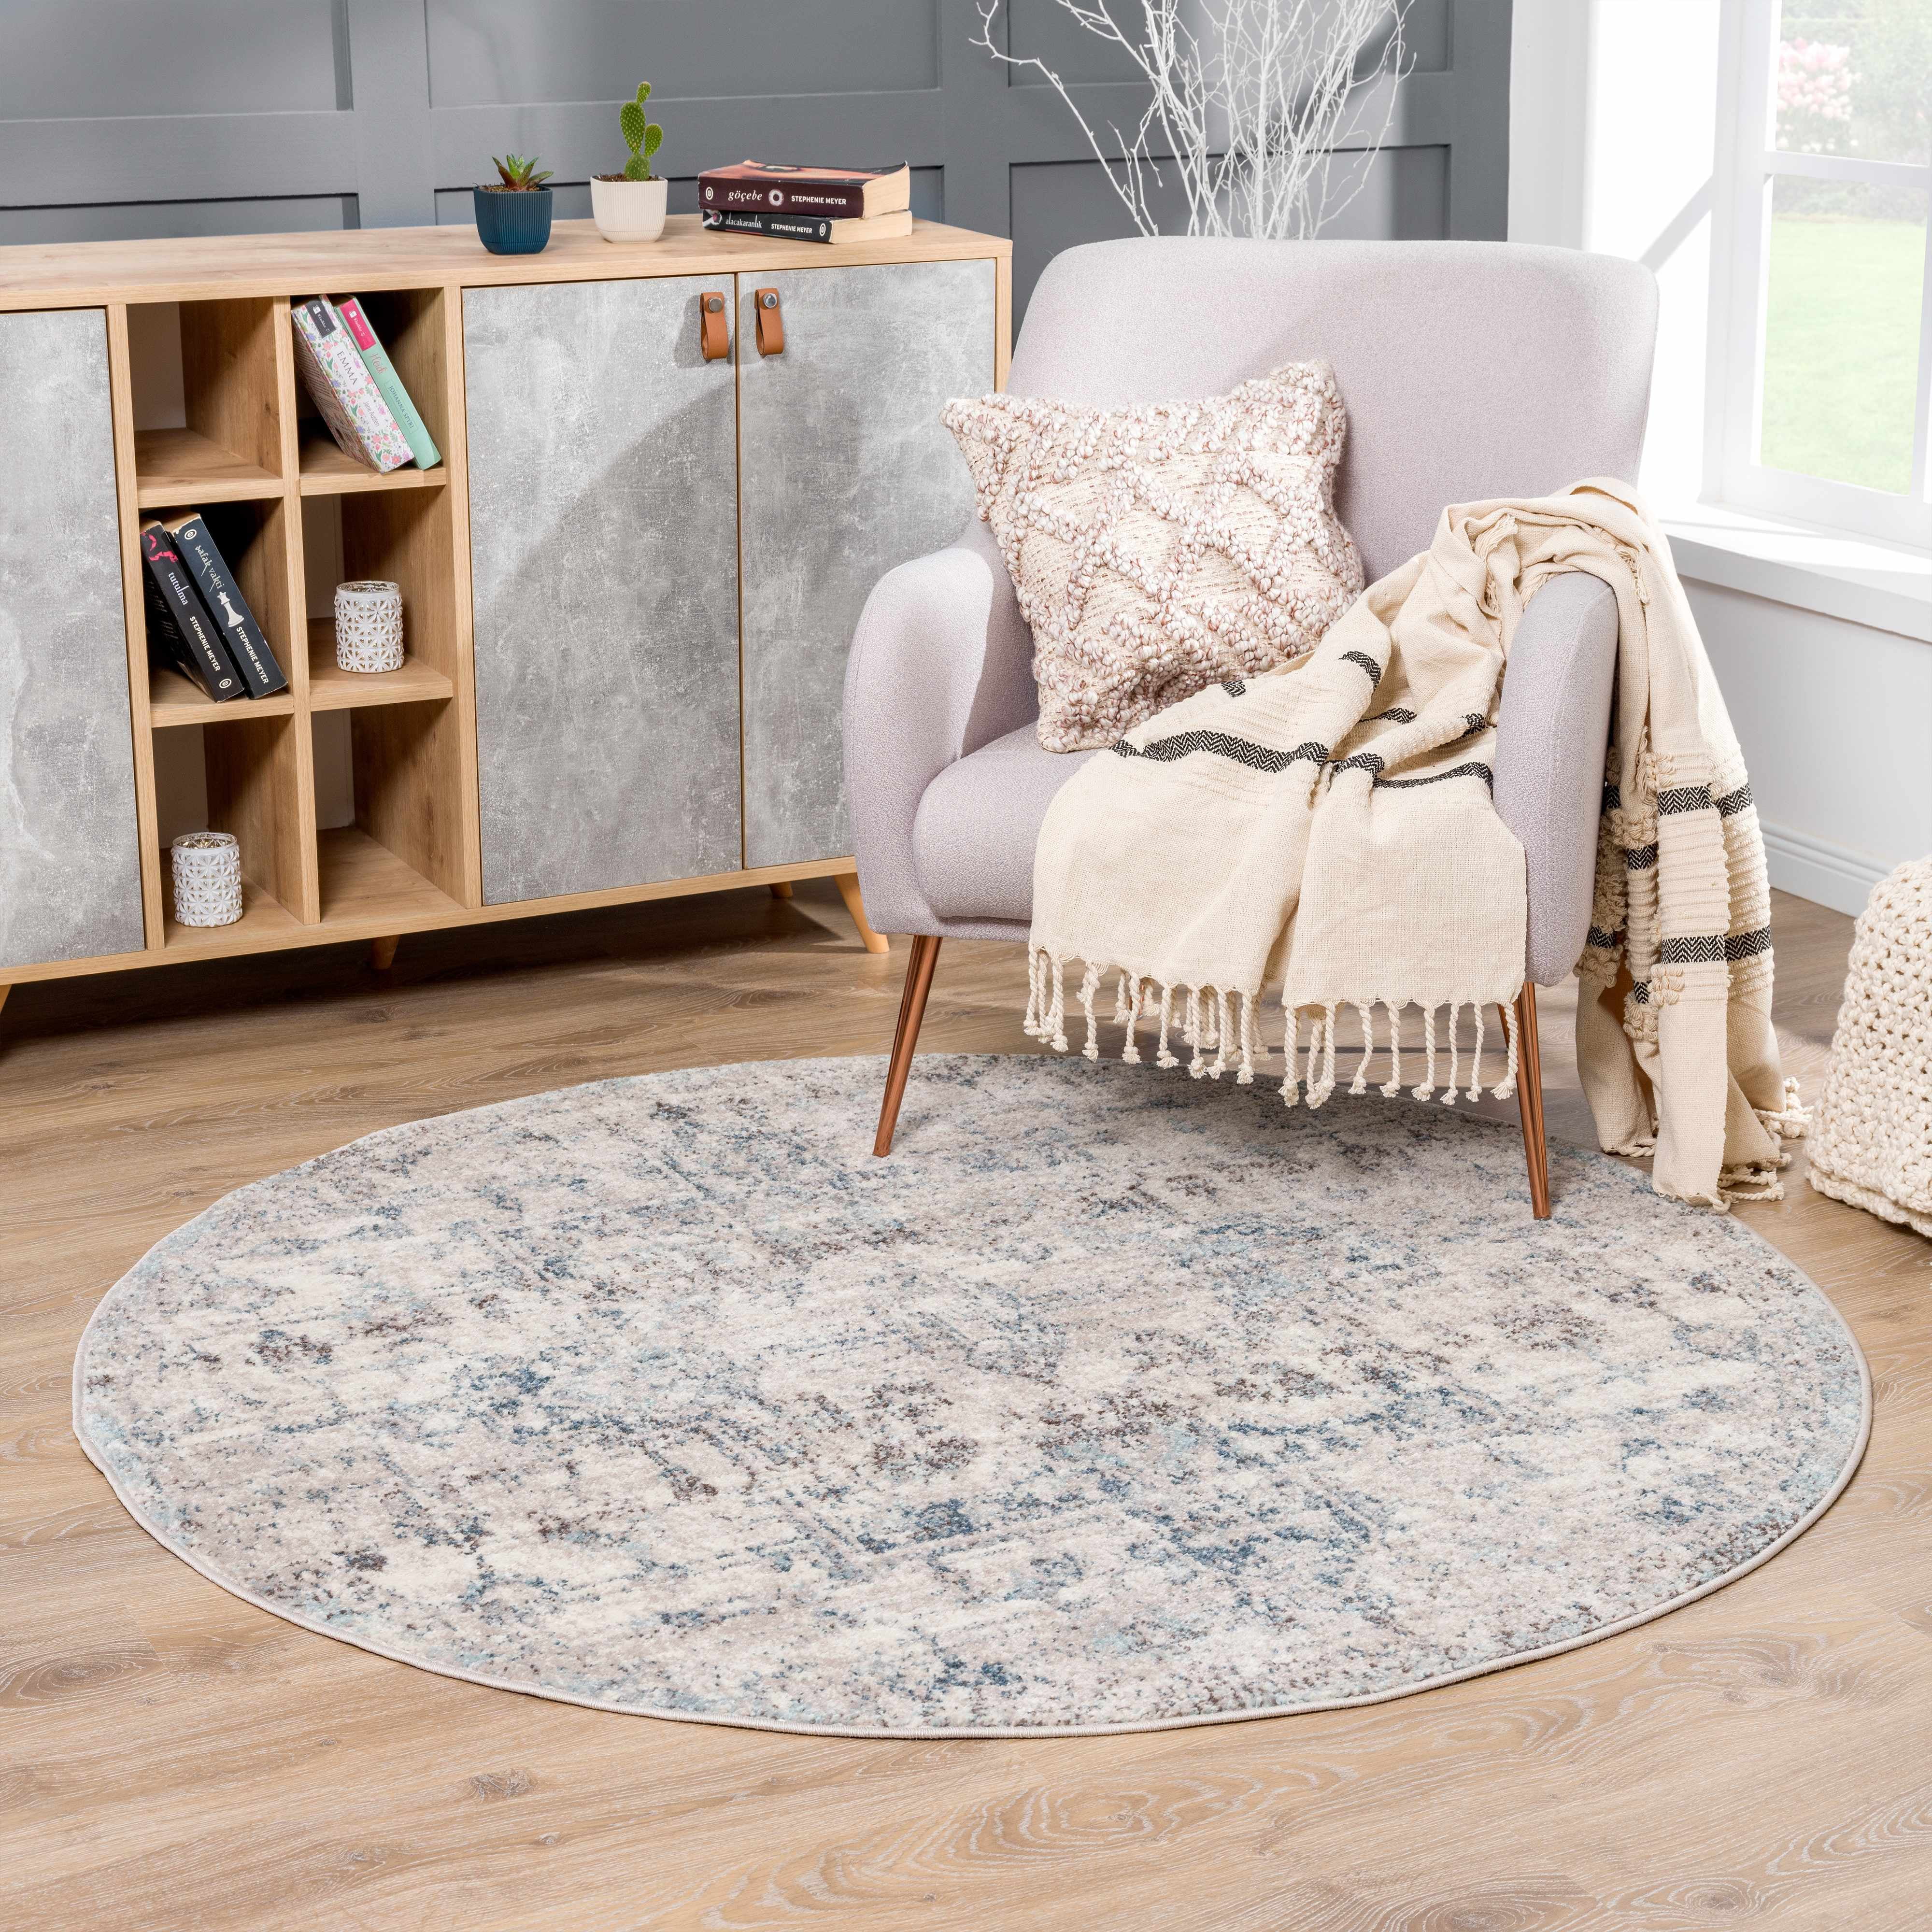 Woven Rug Bedroom Round Carpets Grass Rugs Living Room Coffee